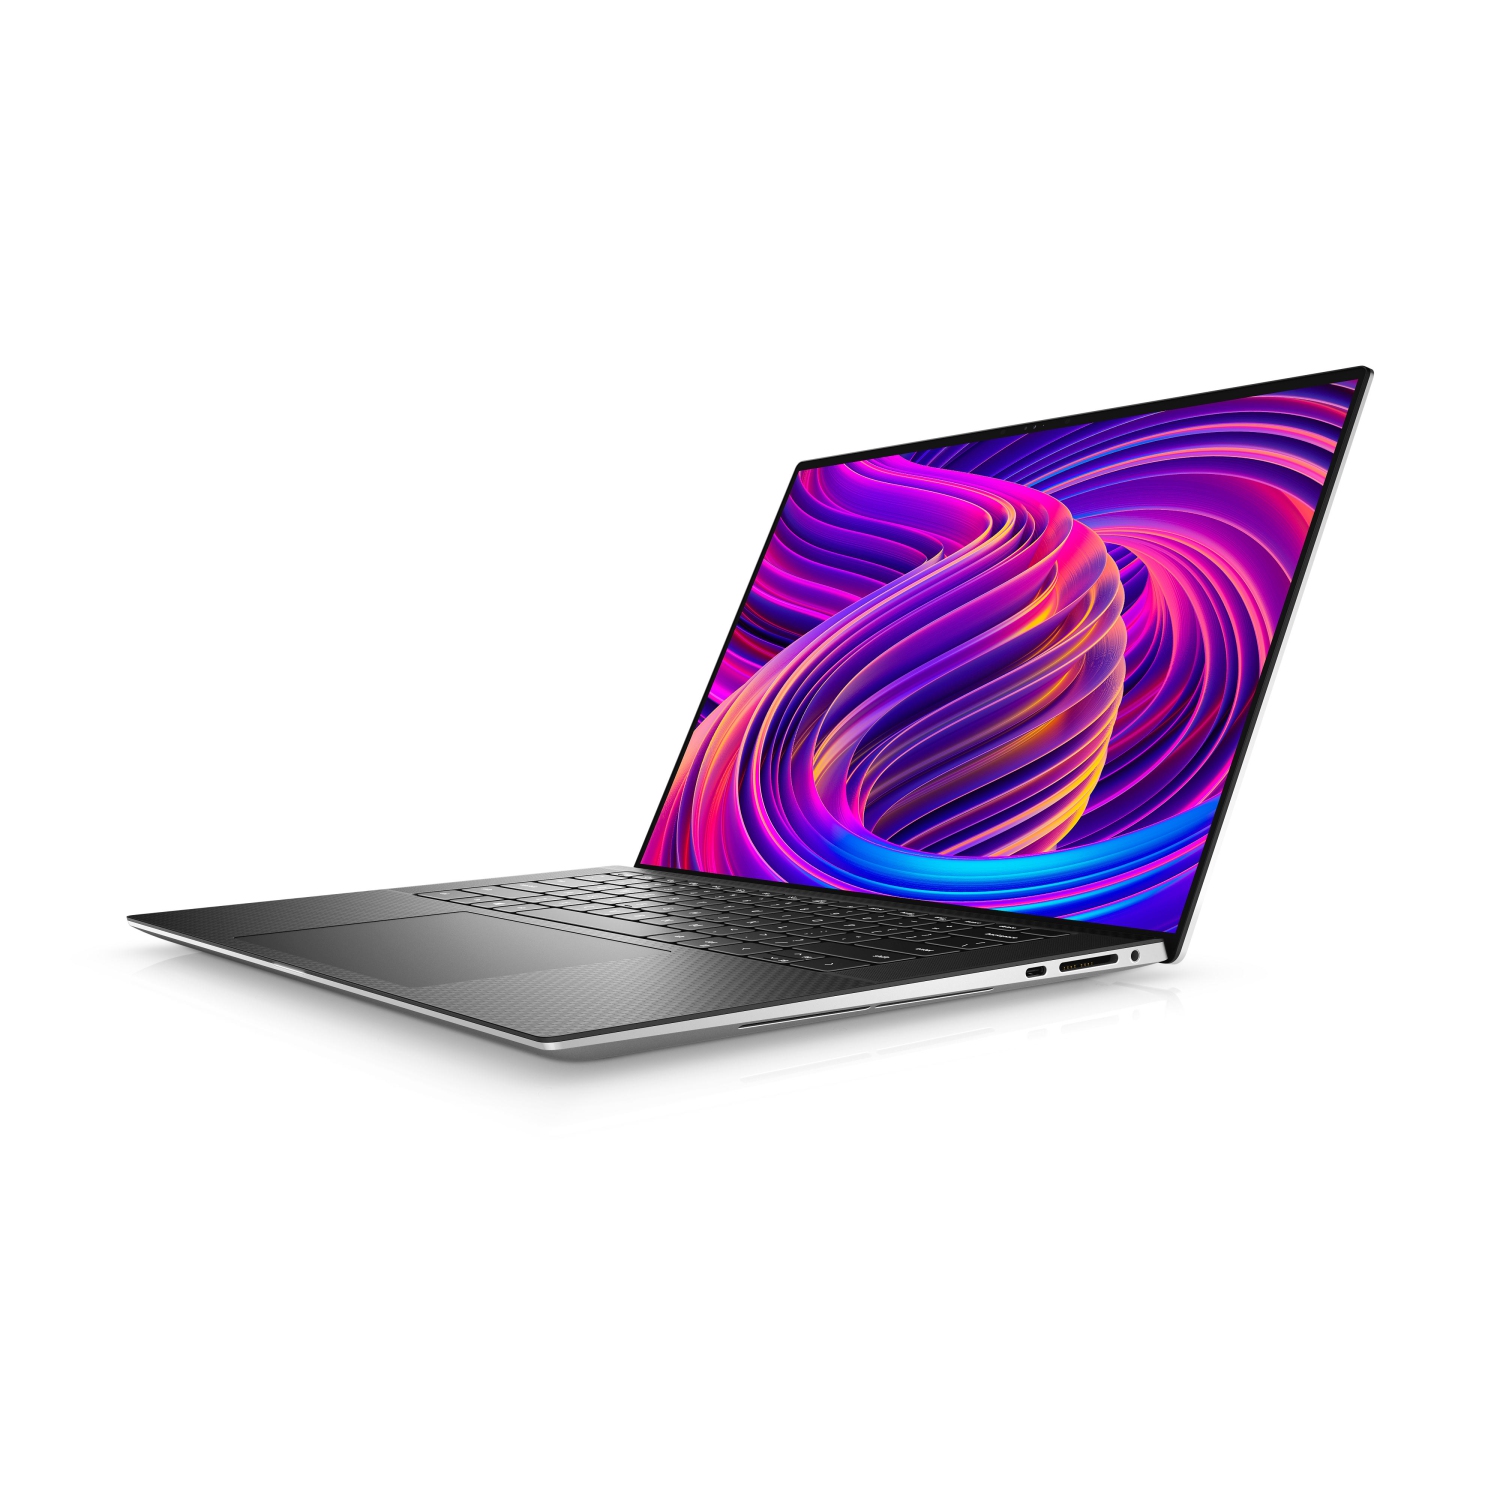 Refurbished (Excellent) - Dell XPS 15 9510 Laptop (2021) | 15.6" FHD+ | Core i7 - 2TB SSD - 64GB RAM - RTX 3050 | 8 Cores @ 4.6 GHz - 11th Gen CPU Certified Refurbished